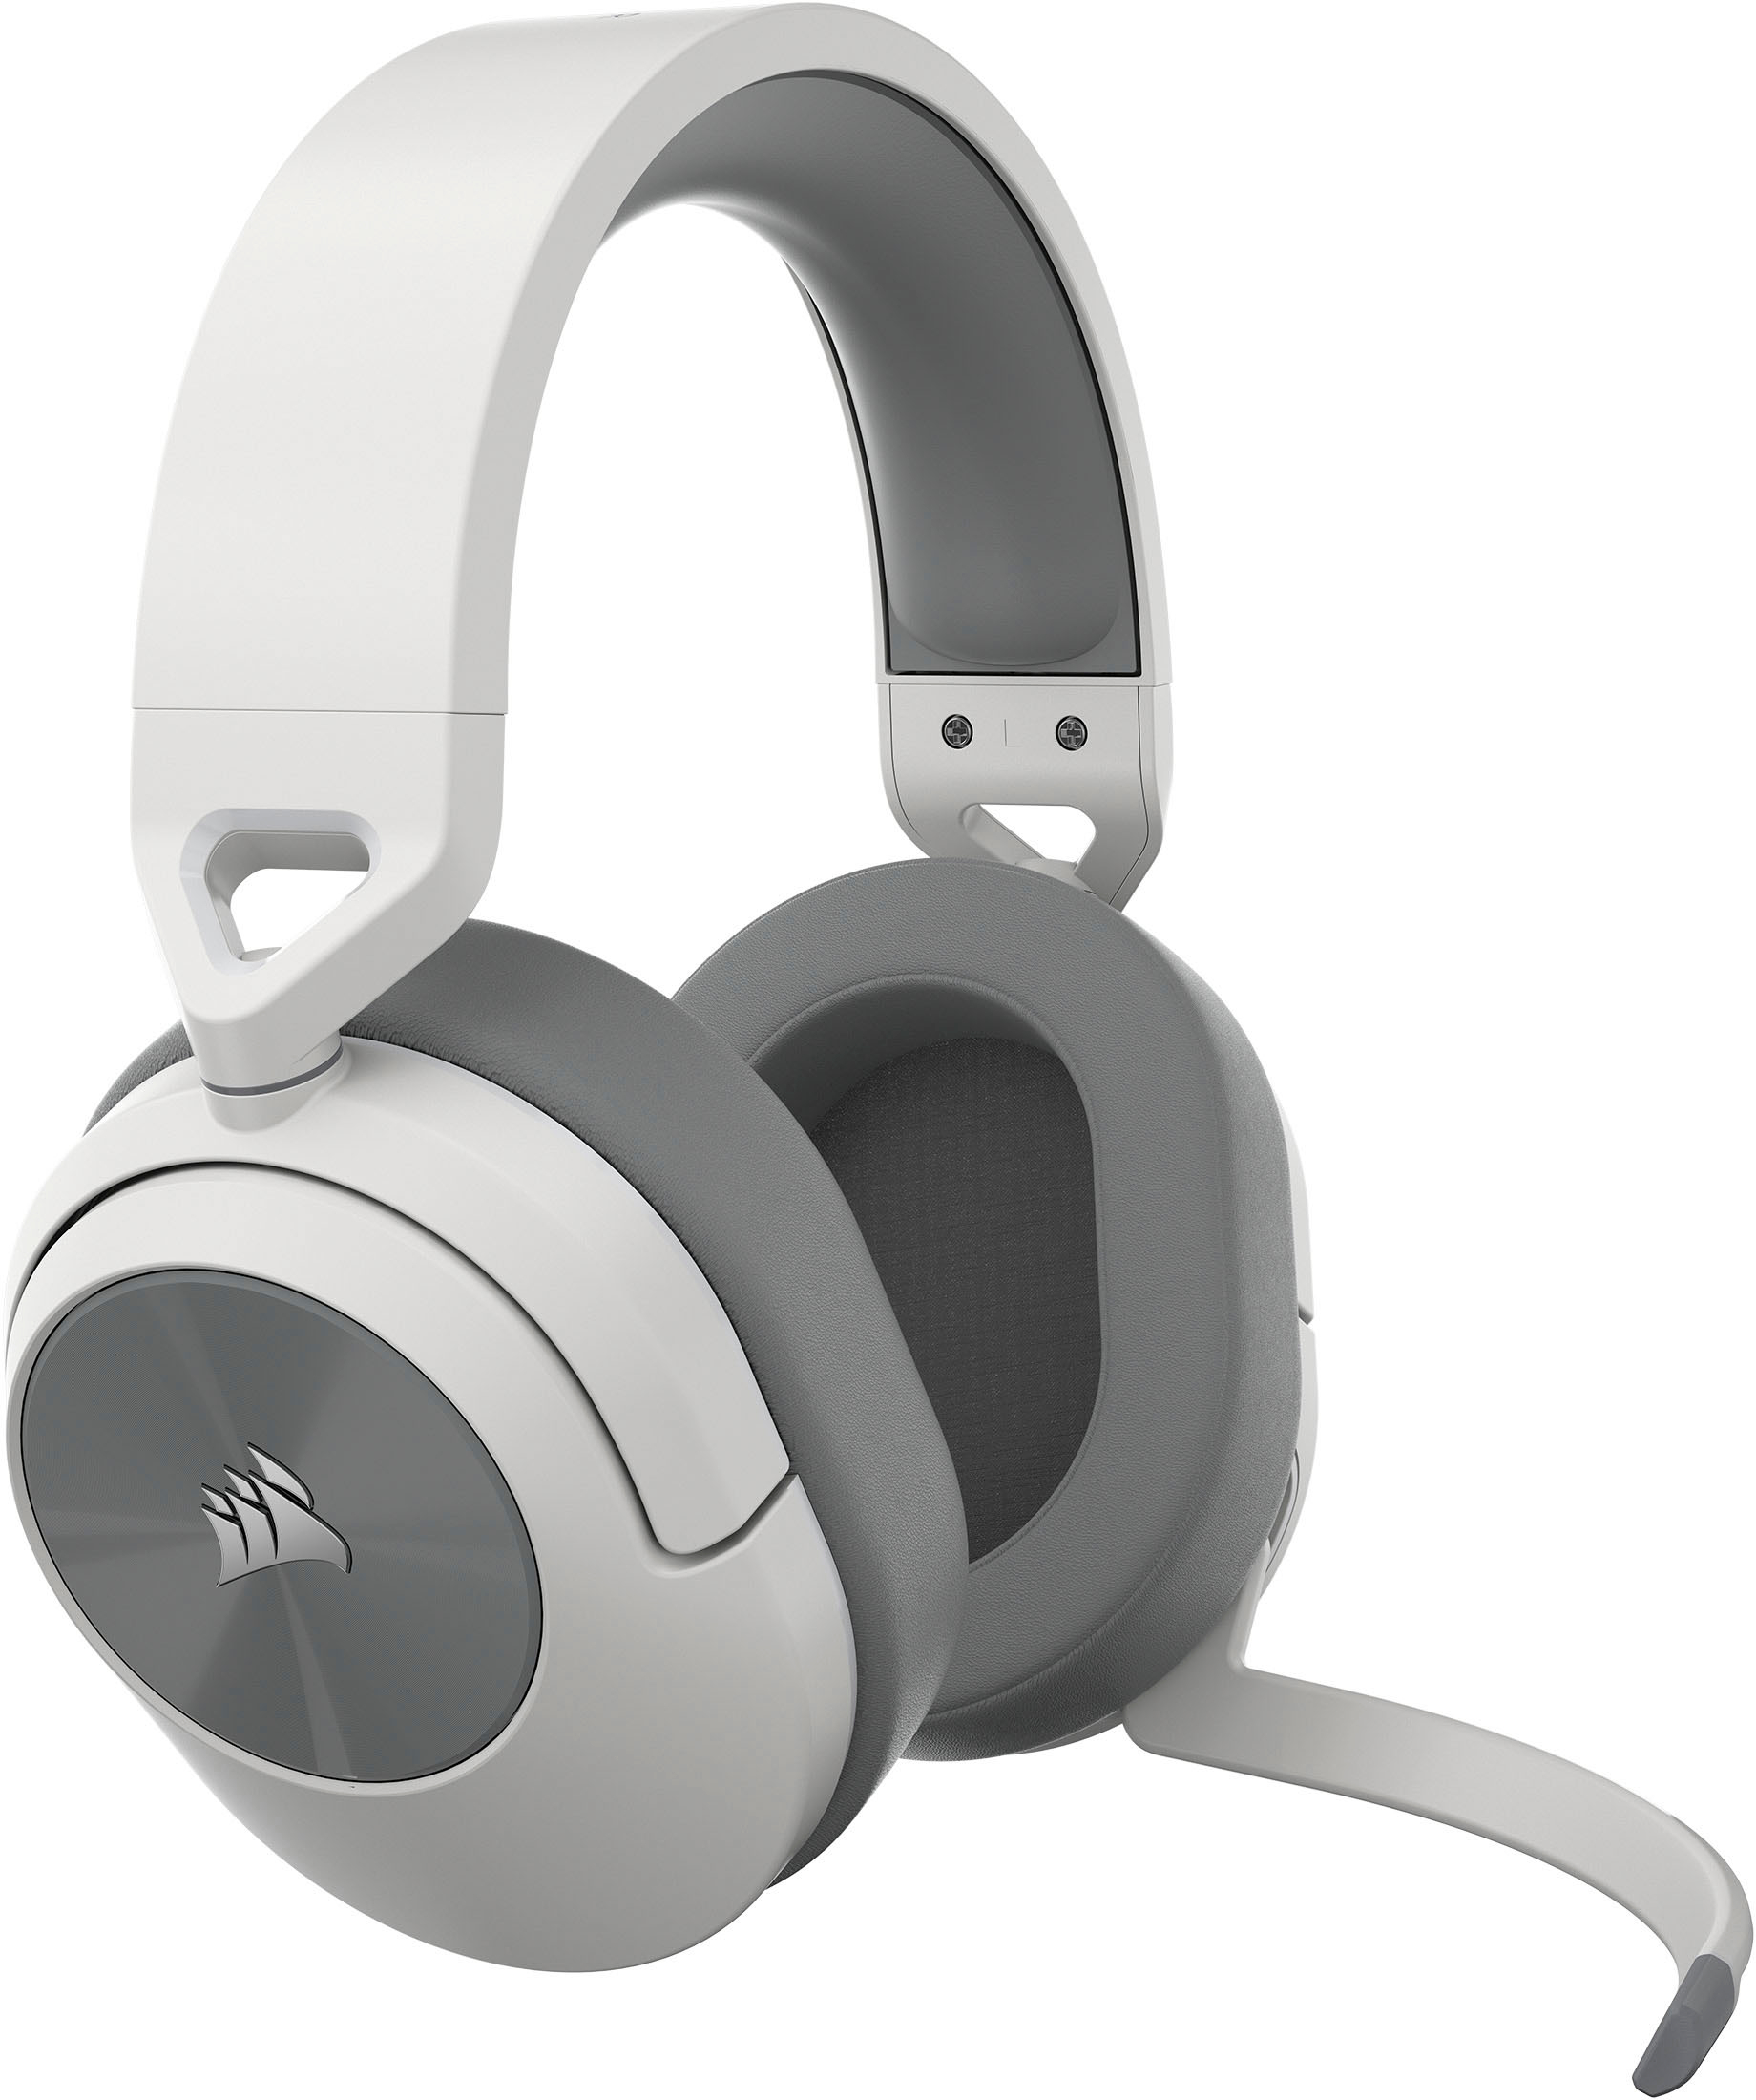 CORSAIR HS Series HS55 Wireless - White and Buy Mobile for PC, Headset PS5, Best Gaming CA-9011281-NA